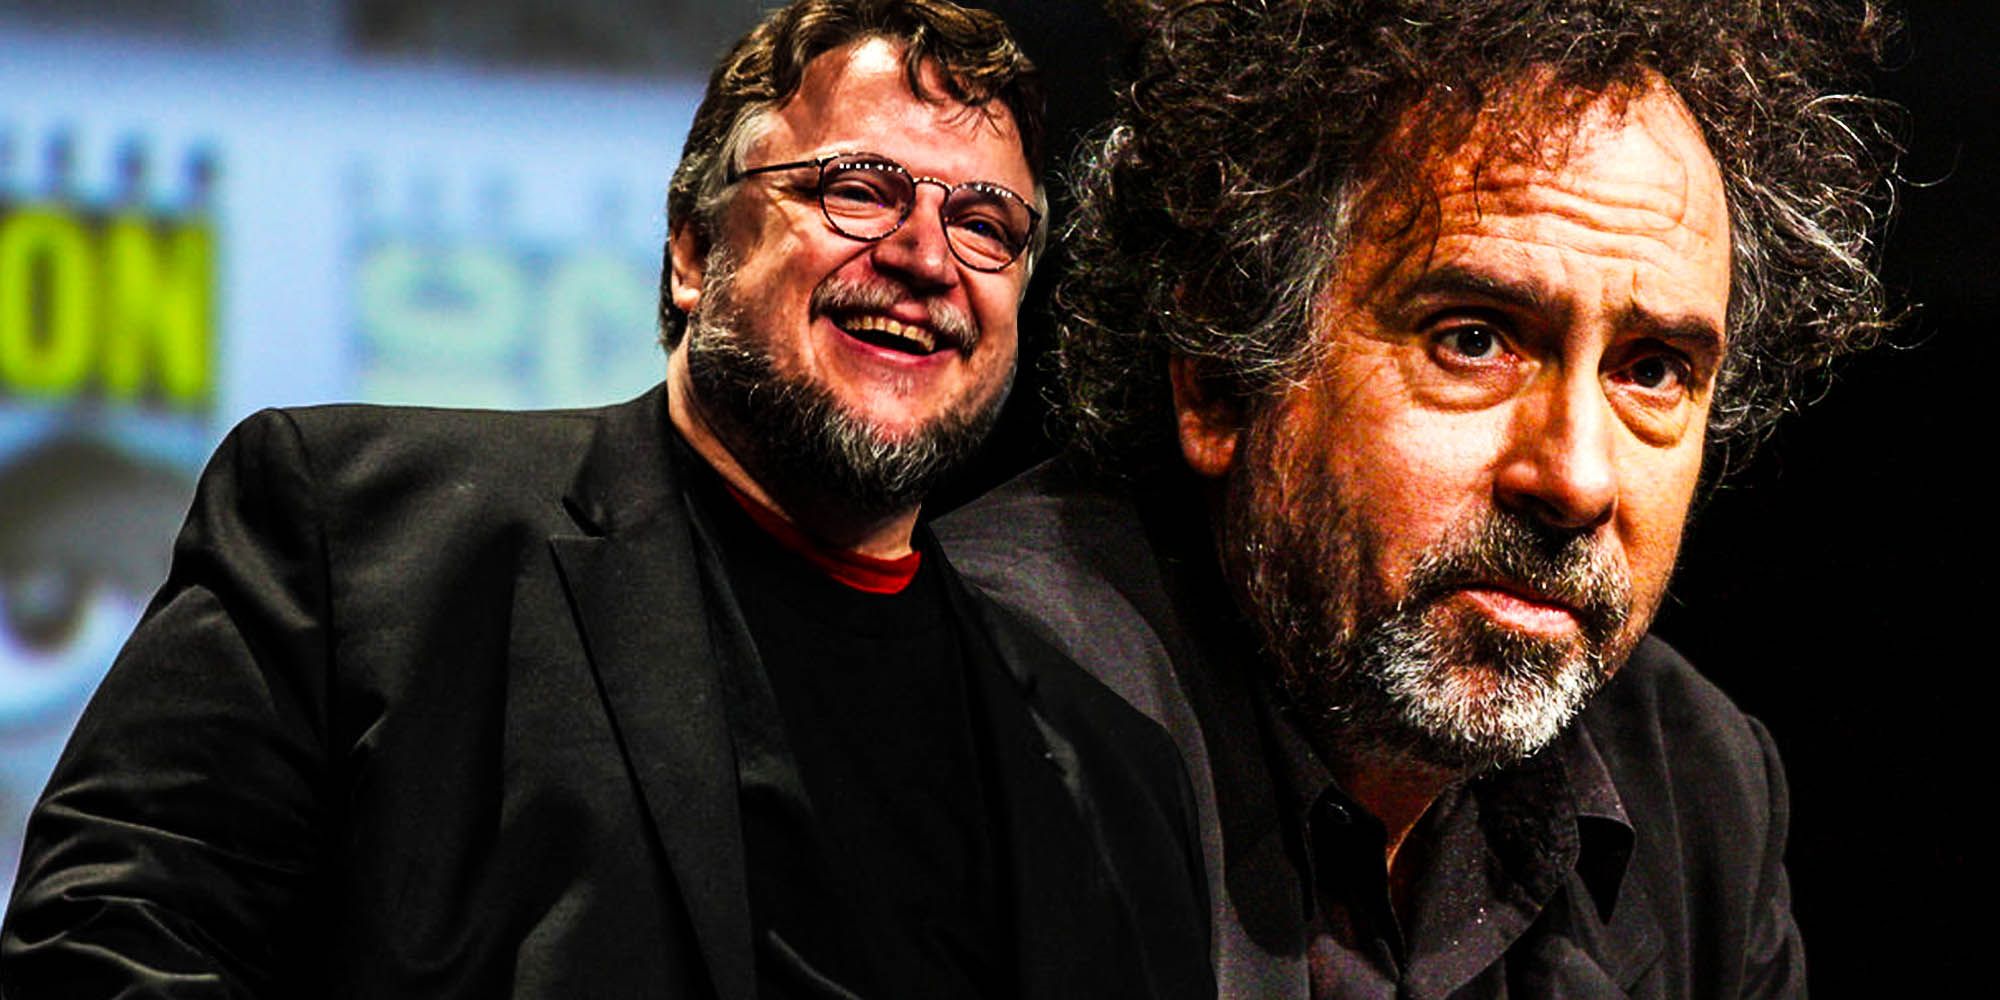 Guillermo Del toro now the director Tim Burton used to be